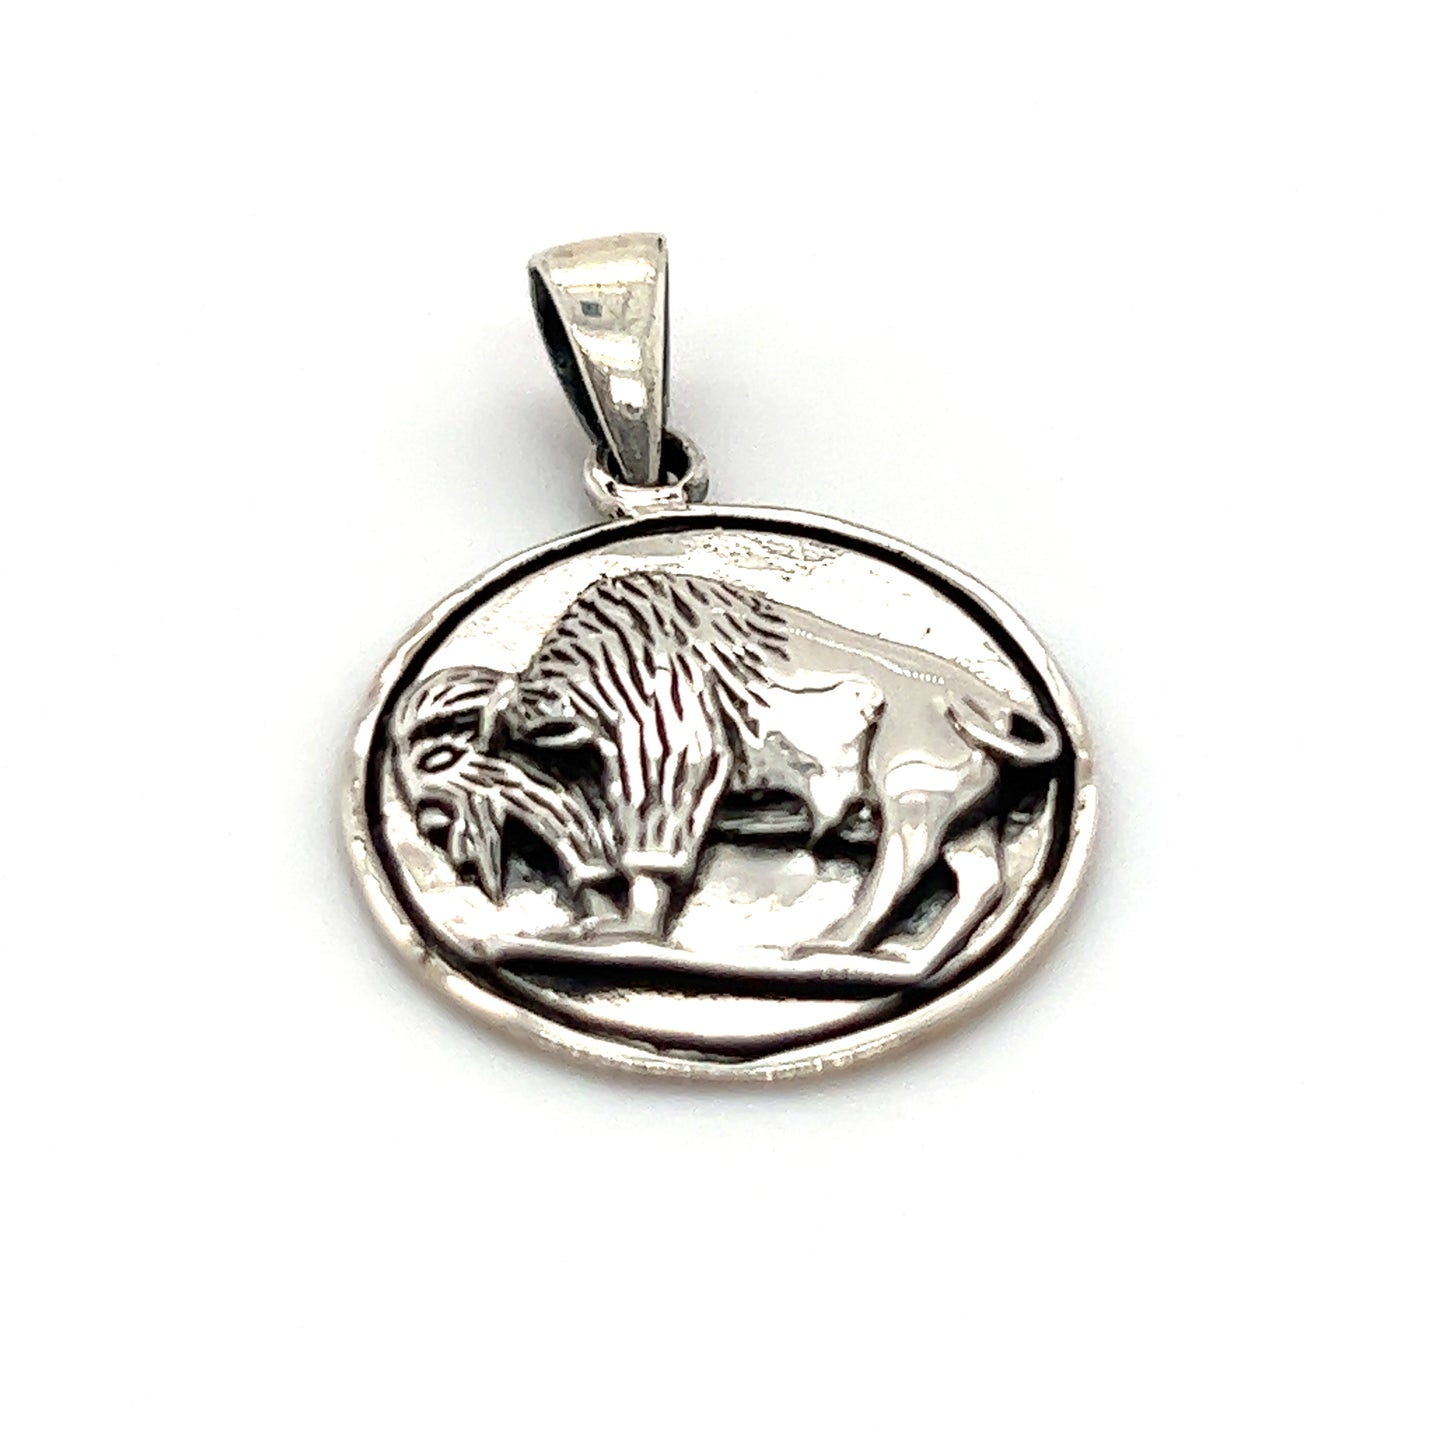 An antique Super Silver Buffalo Coin Charm made of .925 Sterling Silver.